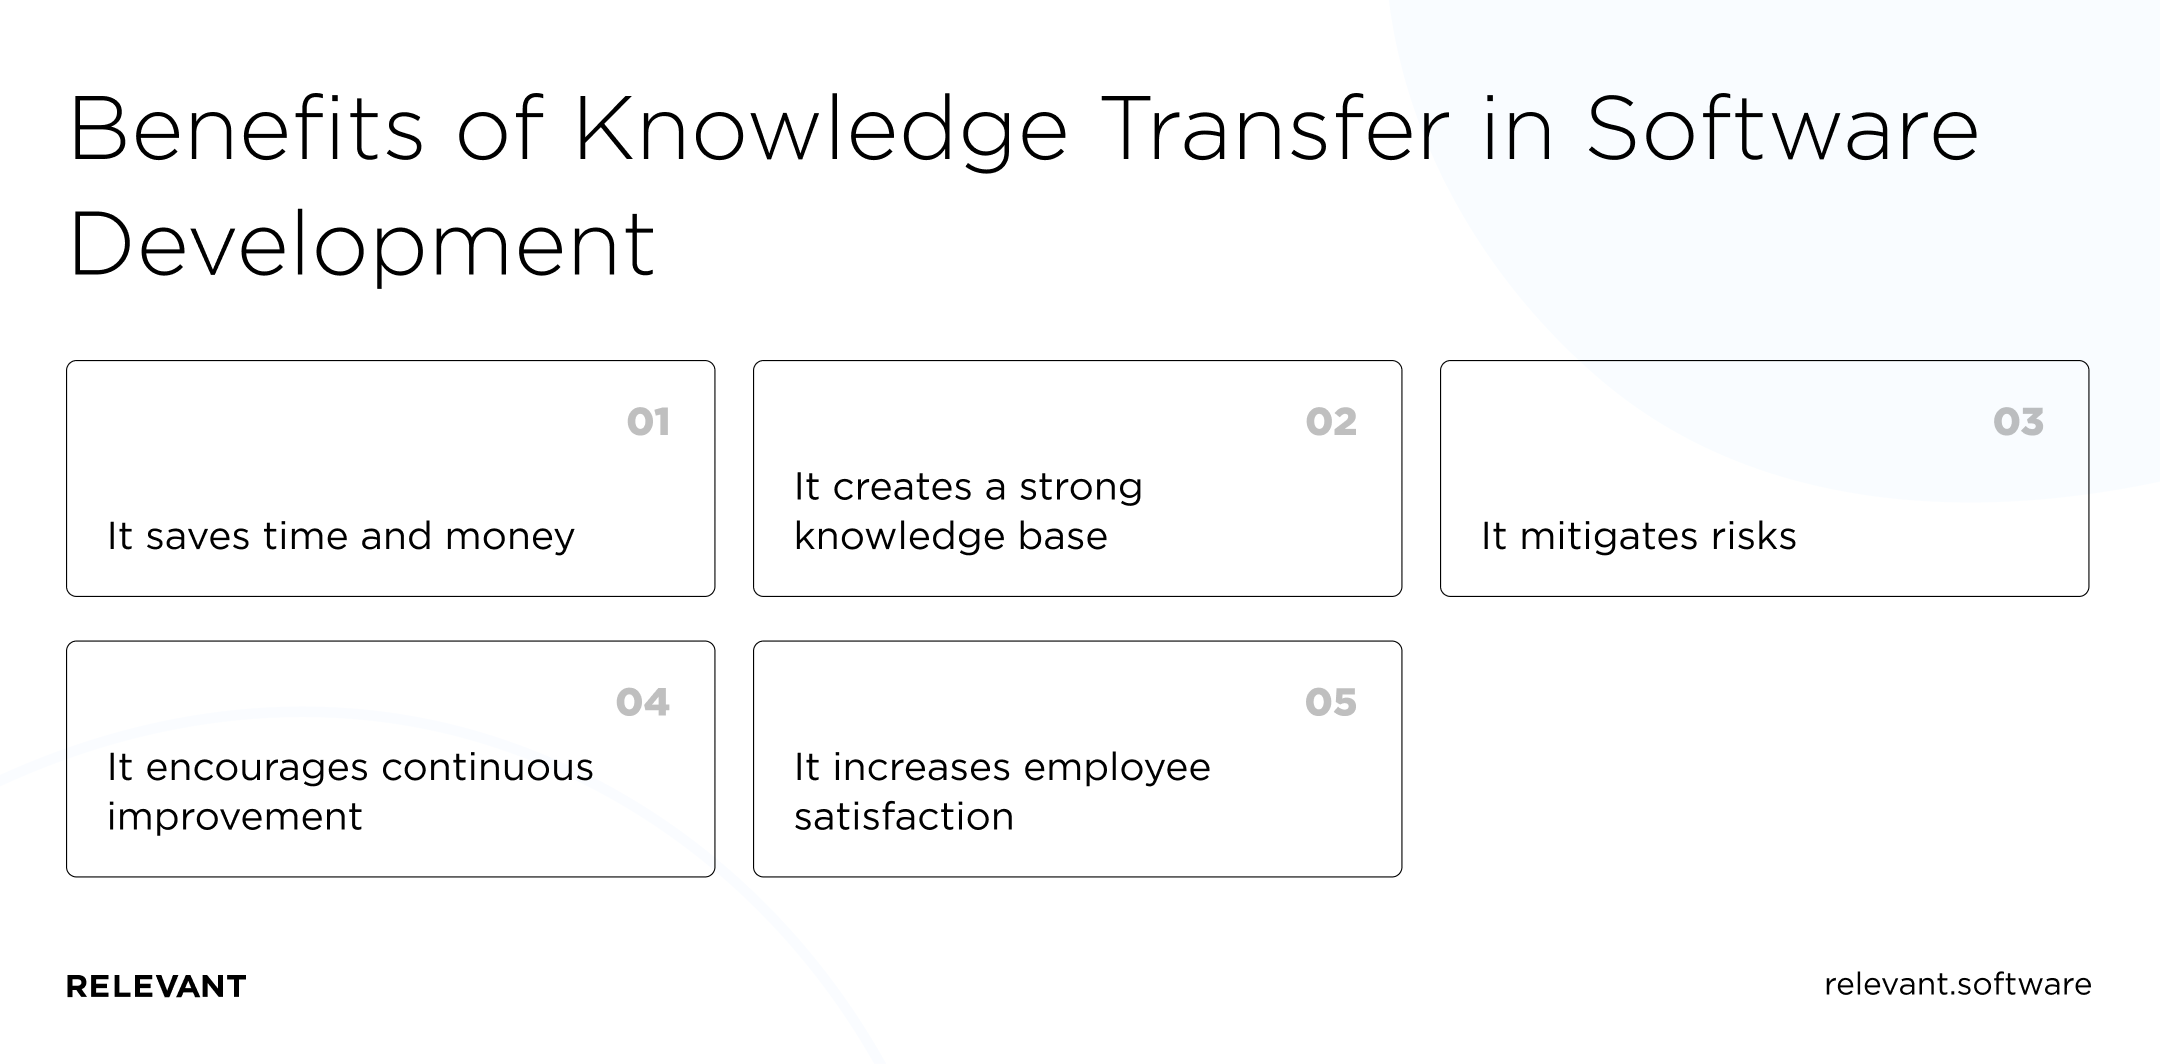 Benefits of Knowledge Transfer in Software Development